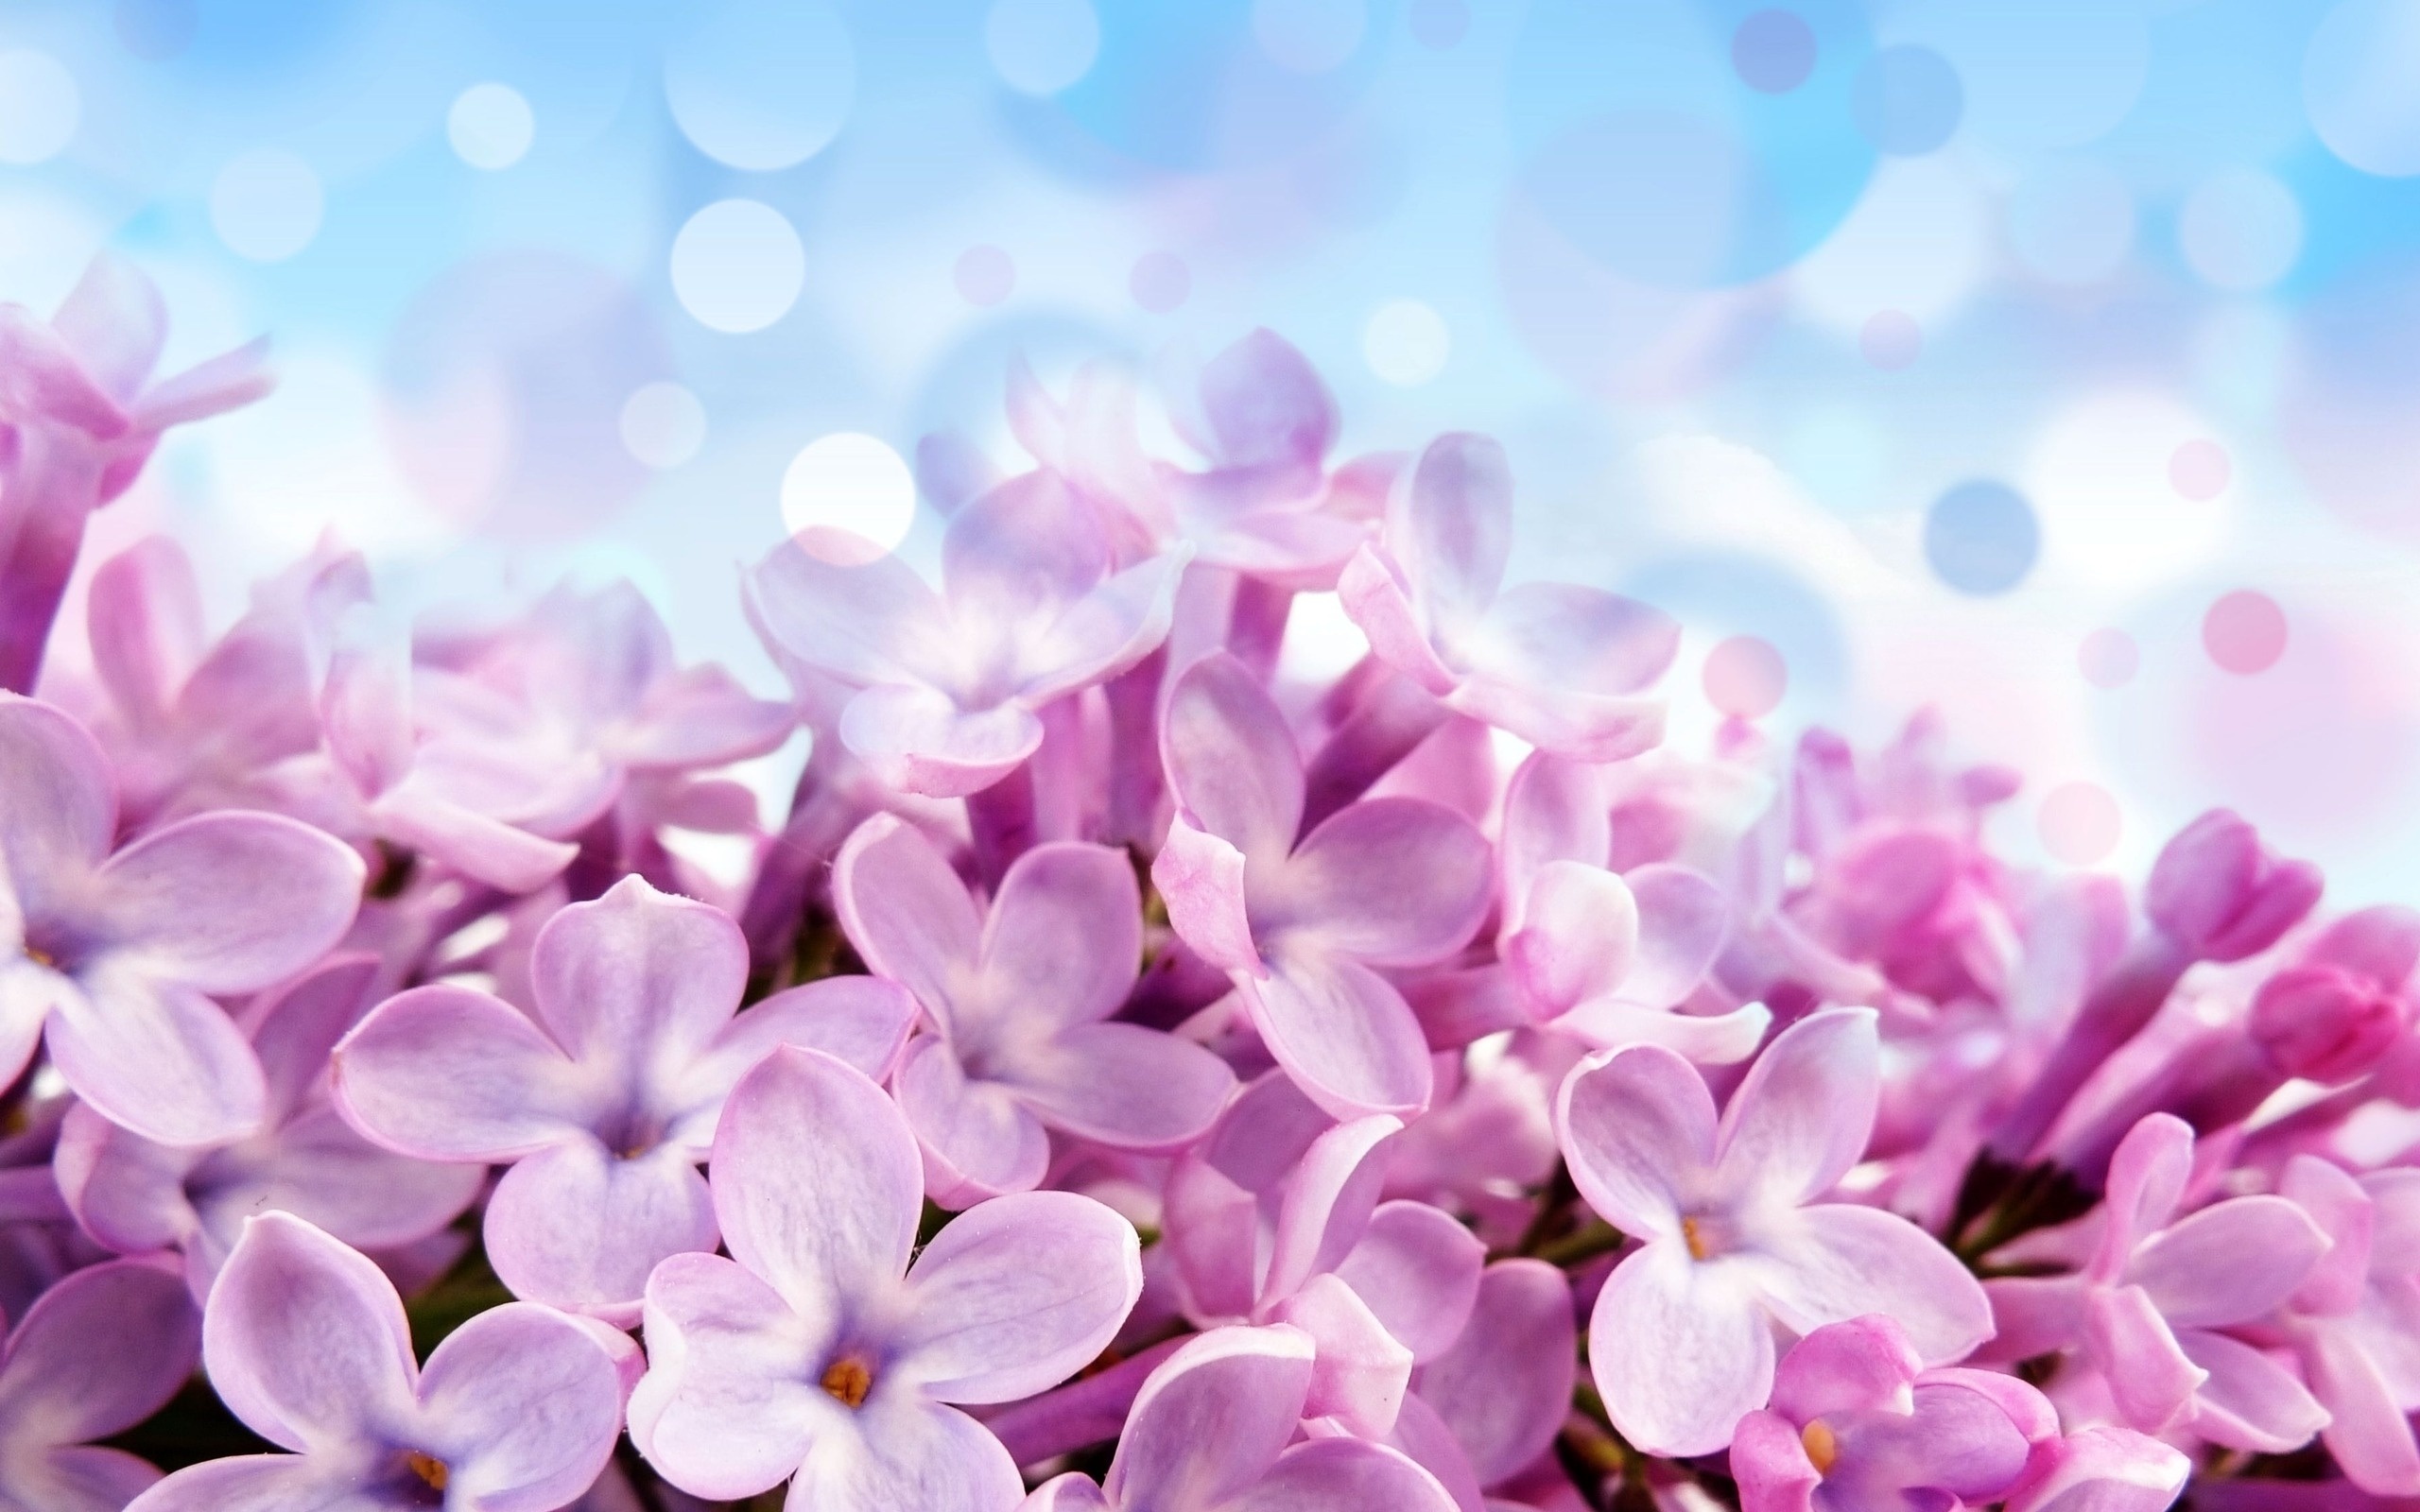 this free flower wallpaper can be downloaded as a 1280x1024 wallpaper